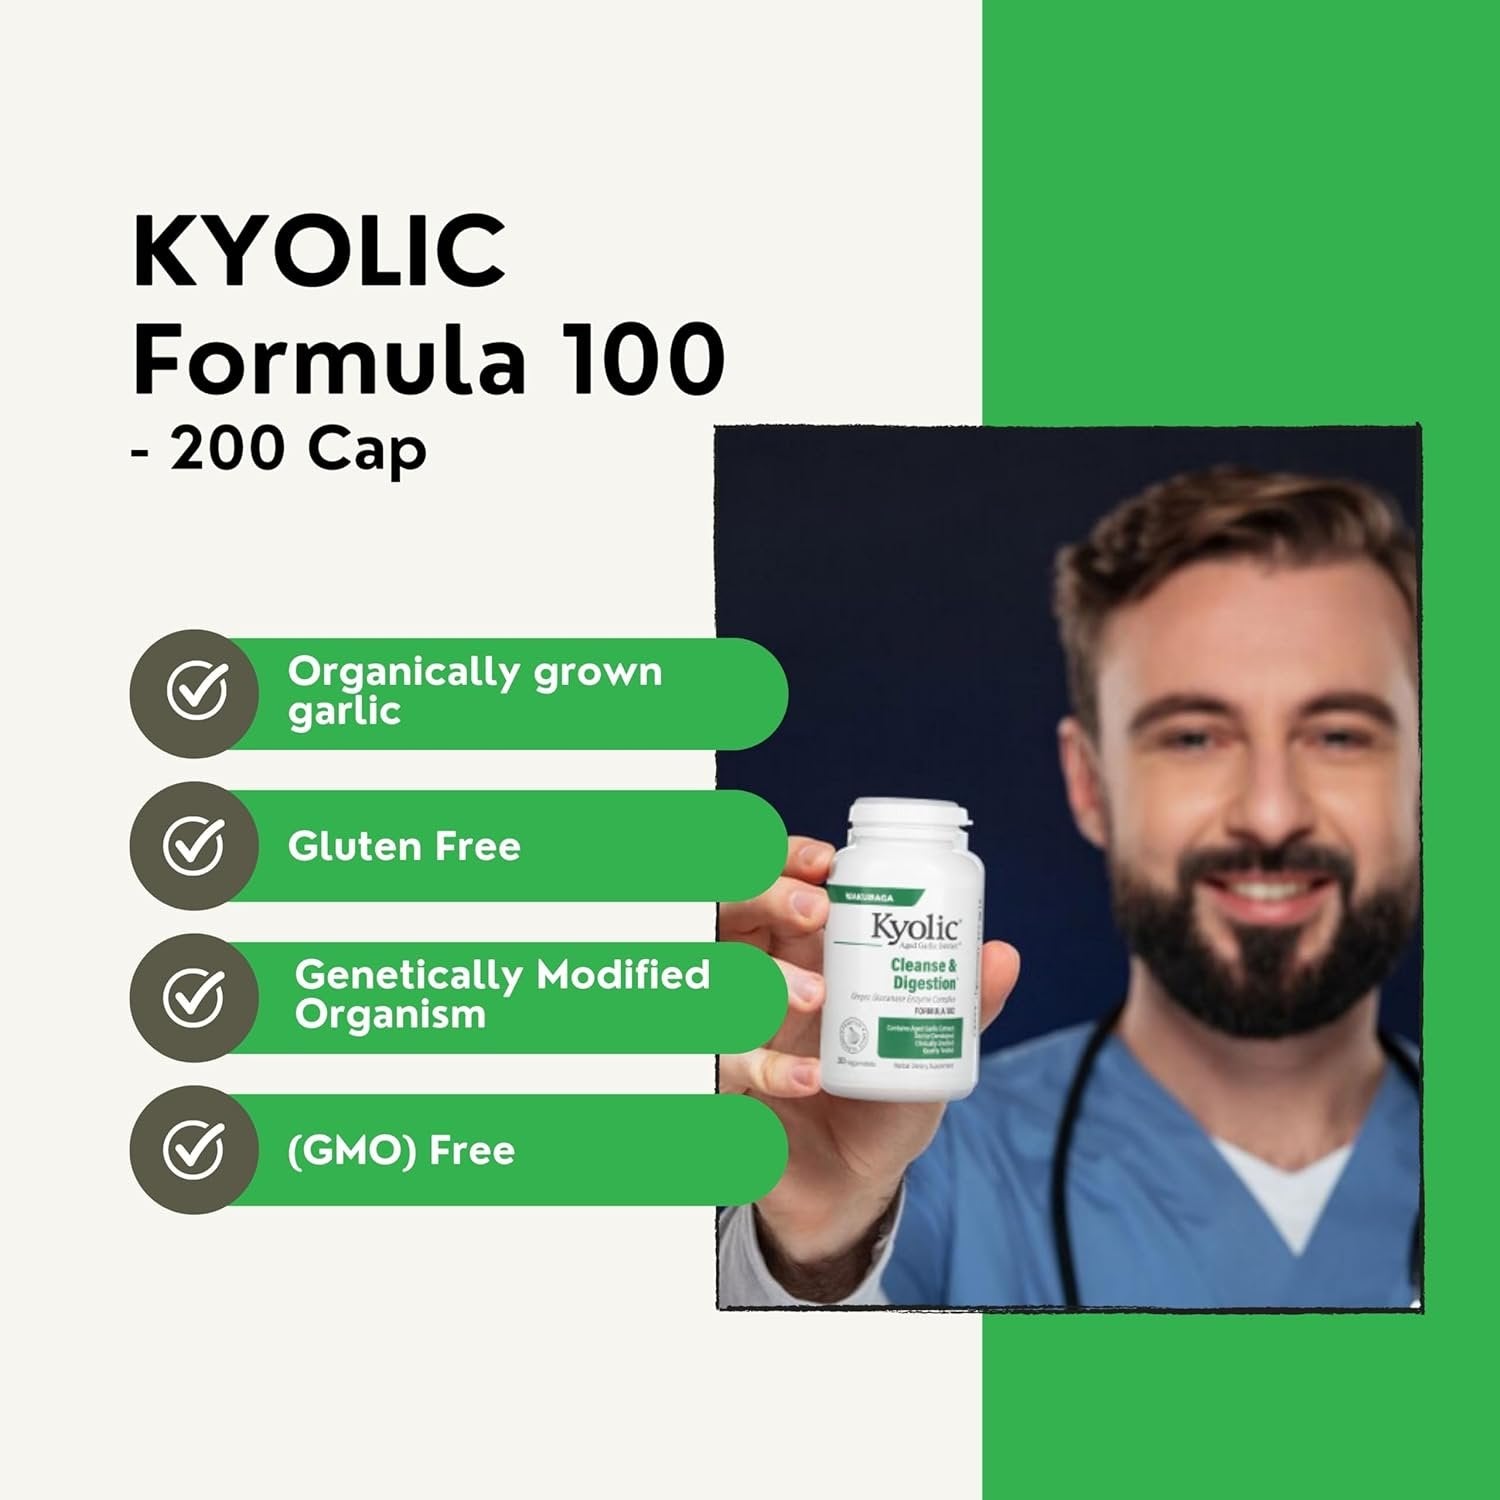 Kyolic Aged Garlic Extract Cleanse & Digestion Formula 102 - 200 Veggie Tablets